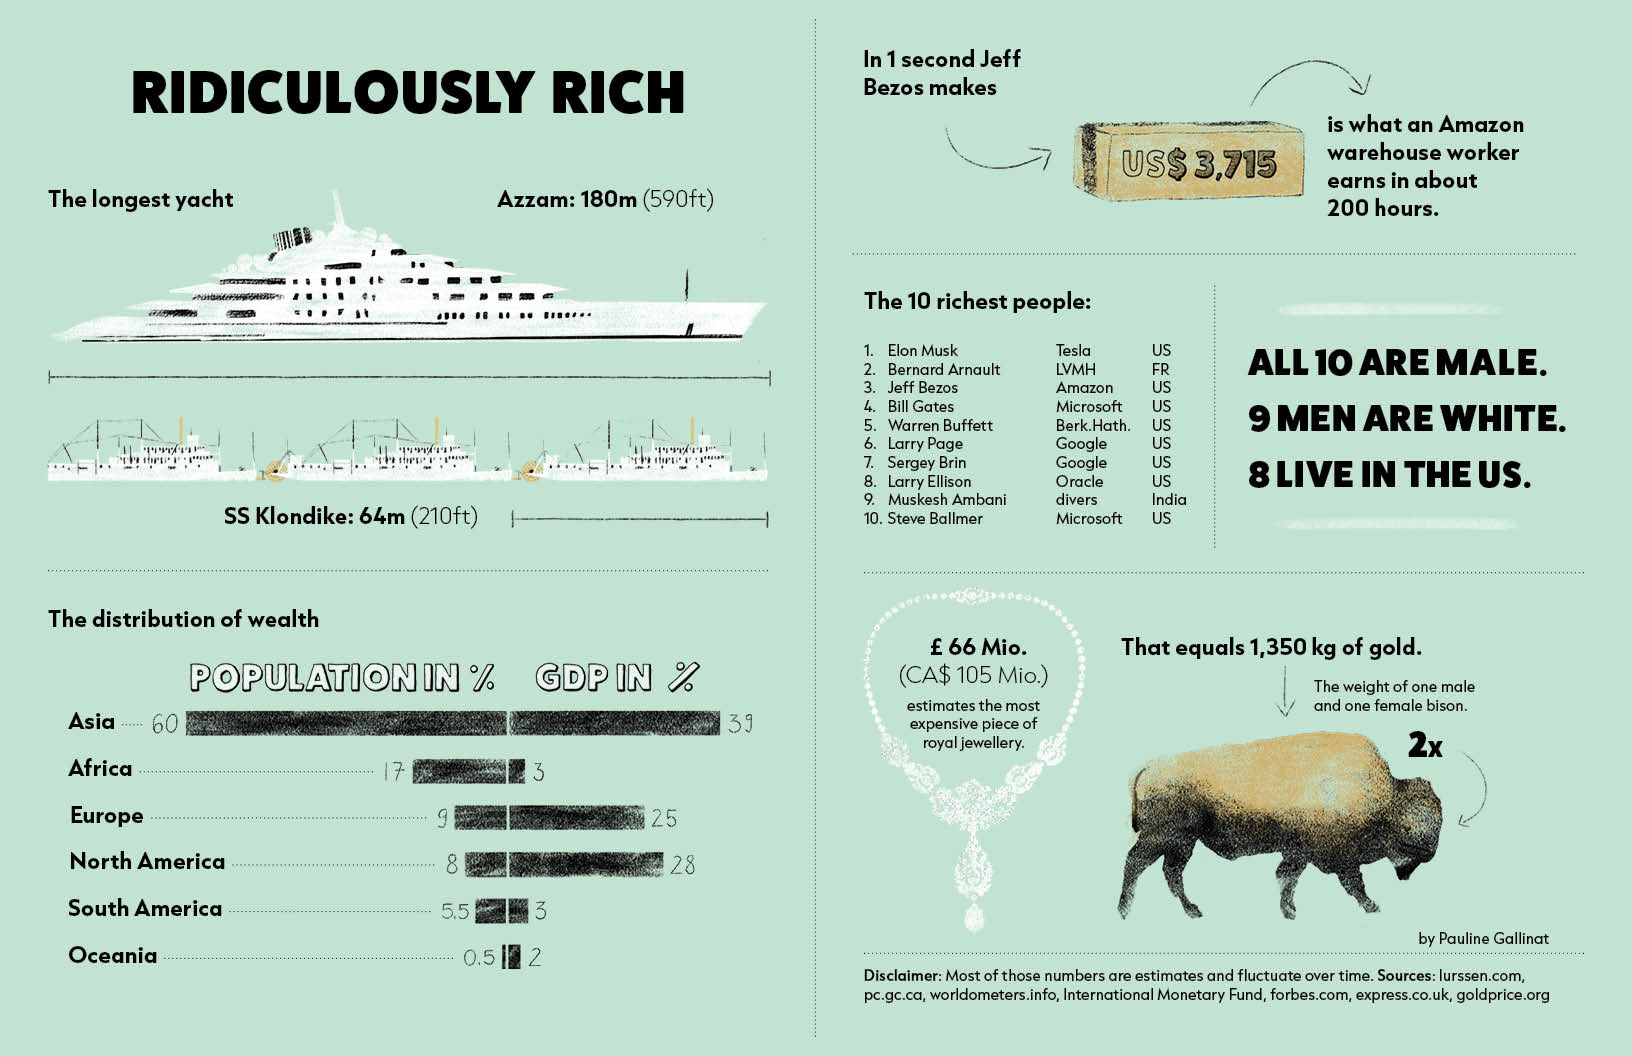 Infographic: Ridiculously Rich, The longest yacht fits almost three sternwheelers; bar chart: The distribution of wealth – Asia population 60%, GDP 39%, Africa population 17%, GDP 3 %, Europe population 9 %, GDP 25%, North America population 8 %, GDP 28%, South America population 5.5 %, GDP 3%, Oceania population 0.5%, GDP 2%; In one second Jeff Bezos makes USD 3715, that is what an Amazon warehouse worker earns in about 200 hours; List of the ten richest people – all 10 are male, 9 men are white, 8 live in the US; 66 Mio. GBP estimates the most expensive piece of royal jewellery, that equals 1350 kg of gold, the weight of one male and one female bison; Disclaimer: Most of those numbers are estimates and fluctuate over time.